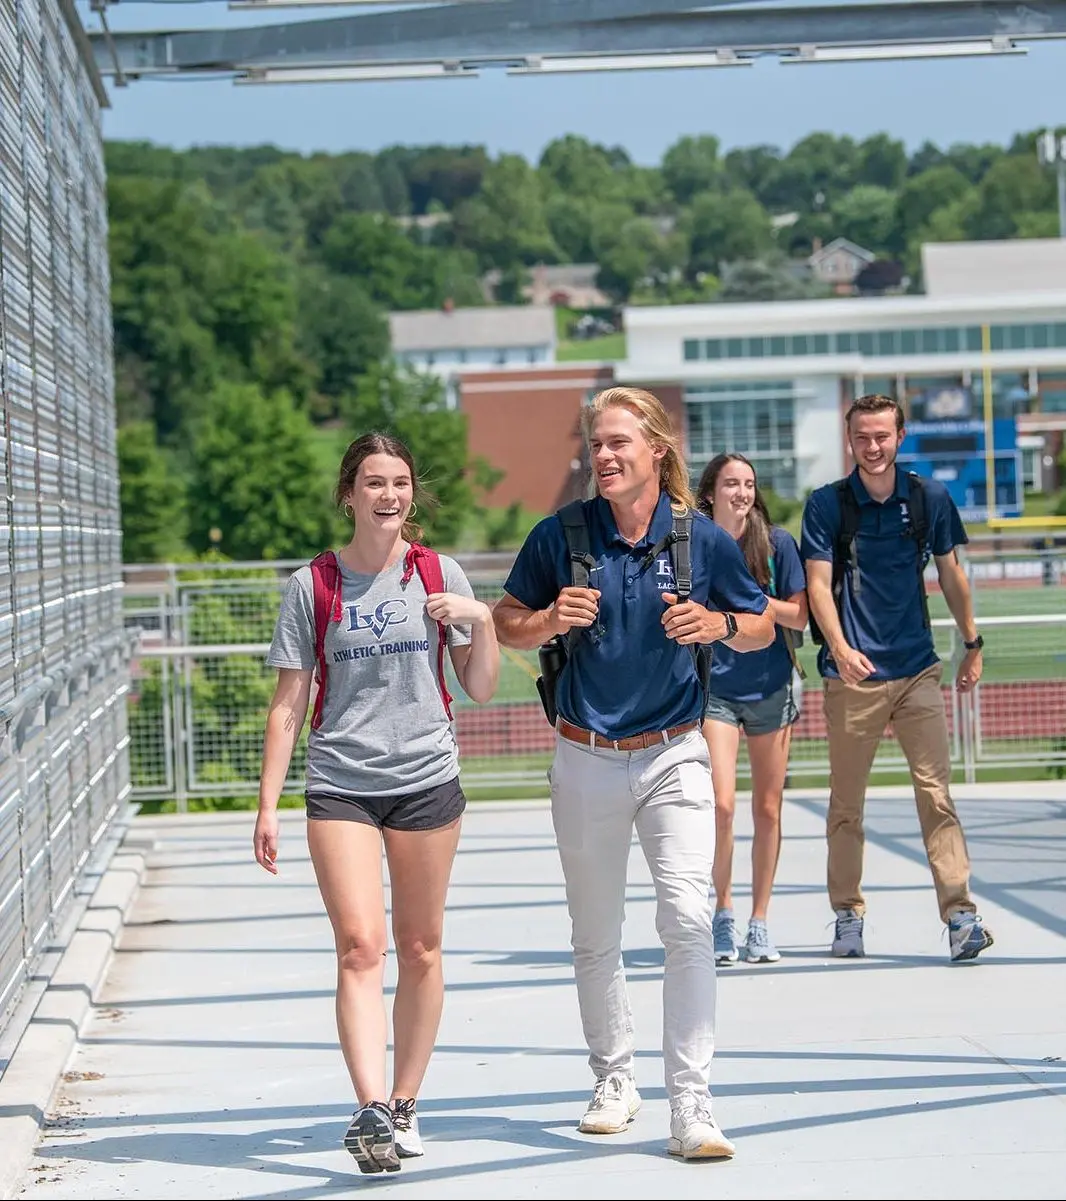 Female student in a gray LVC t shirt walks with male college student in blue polo shirt